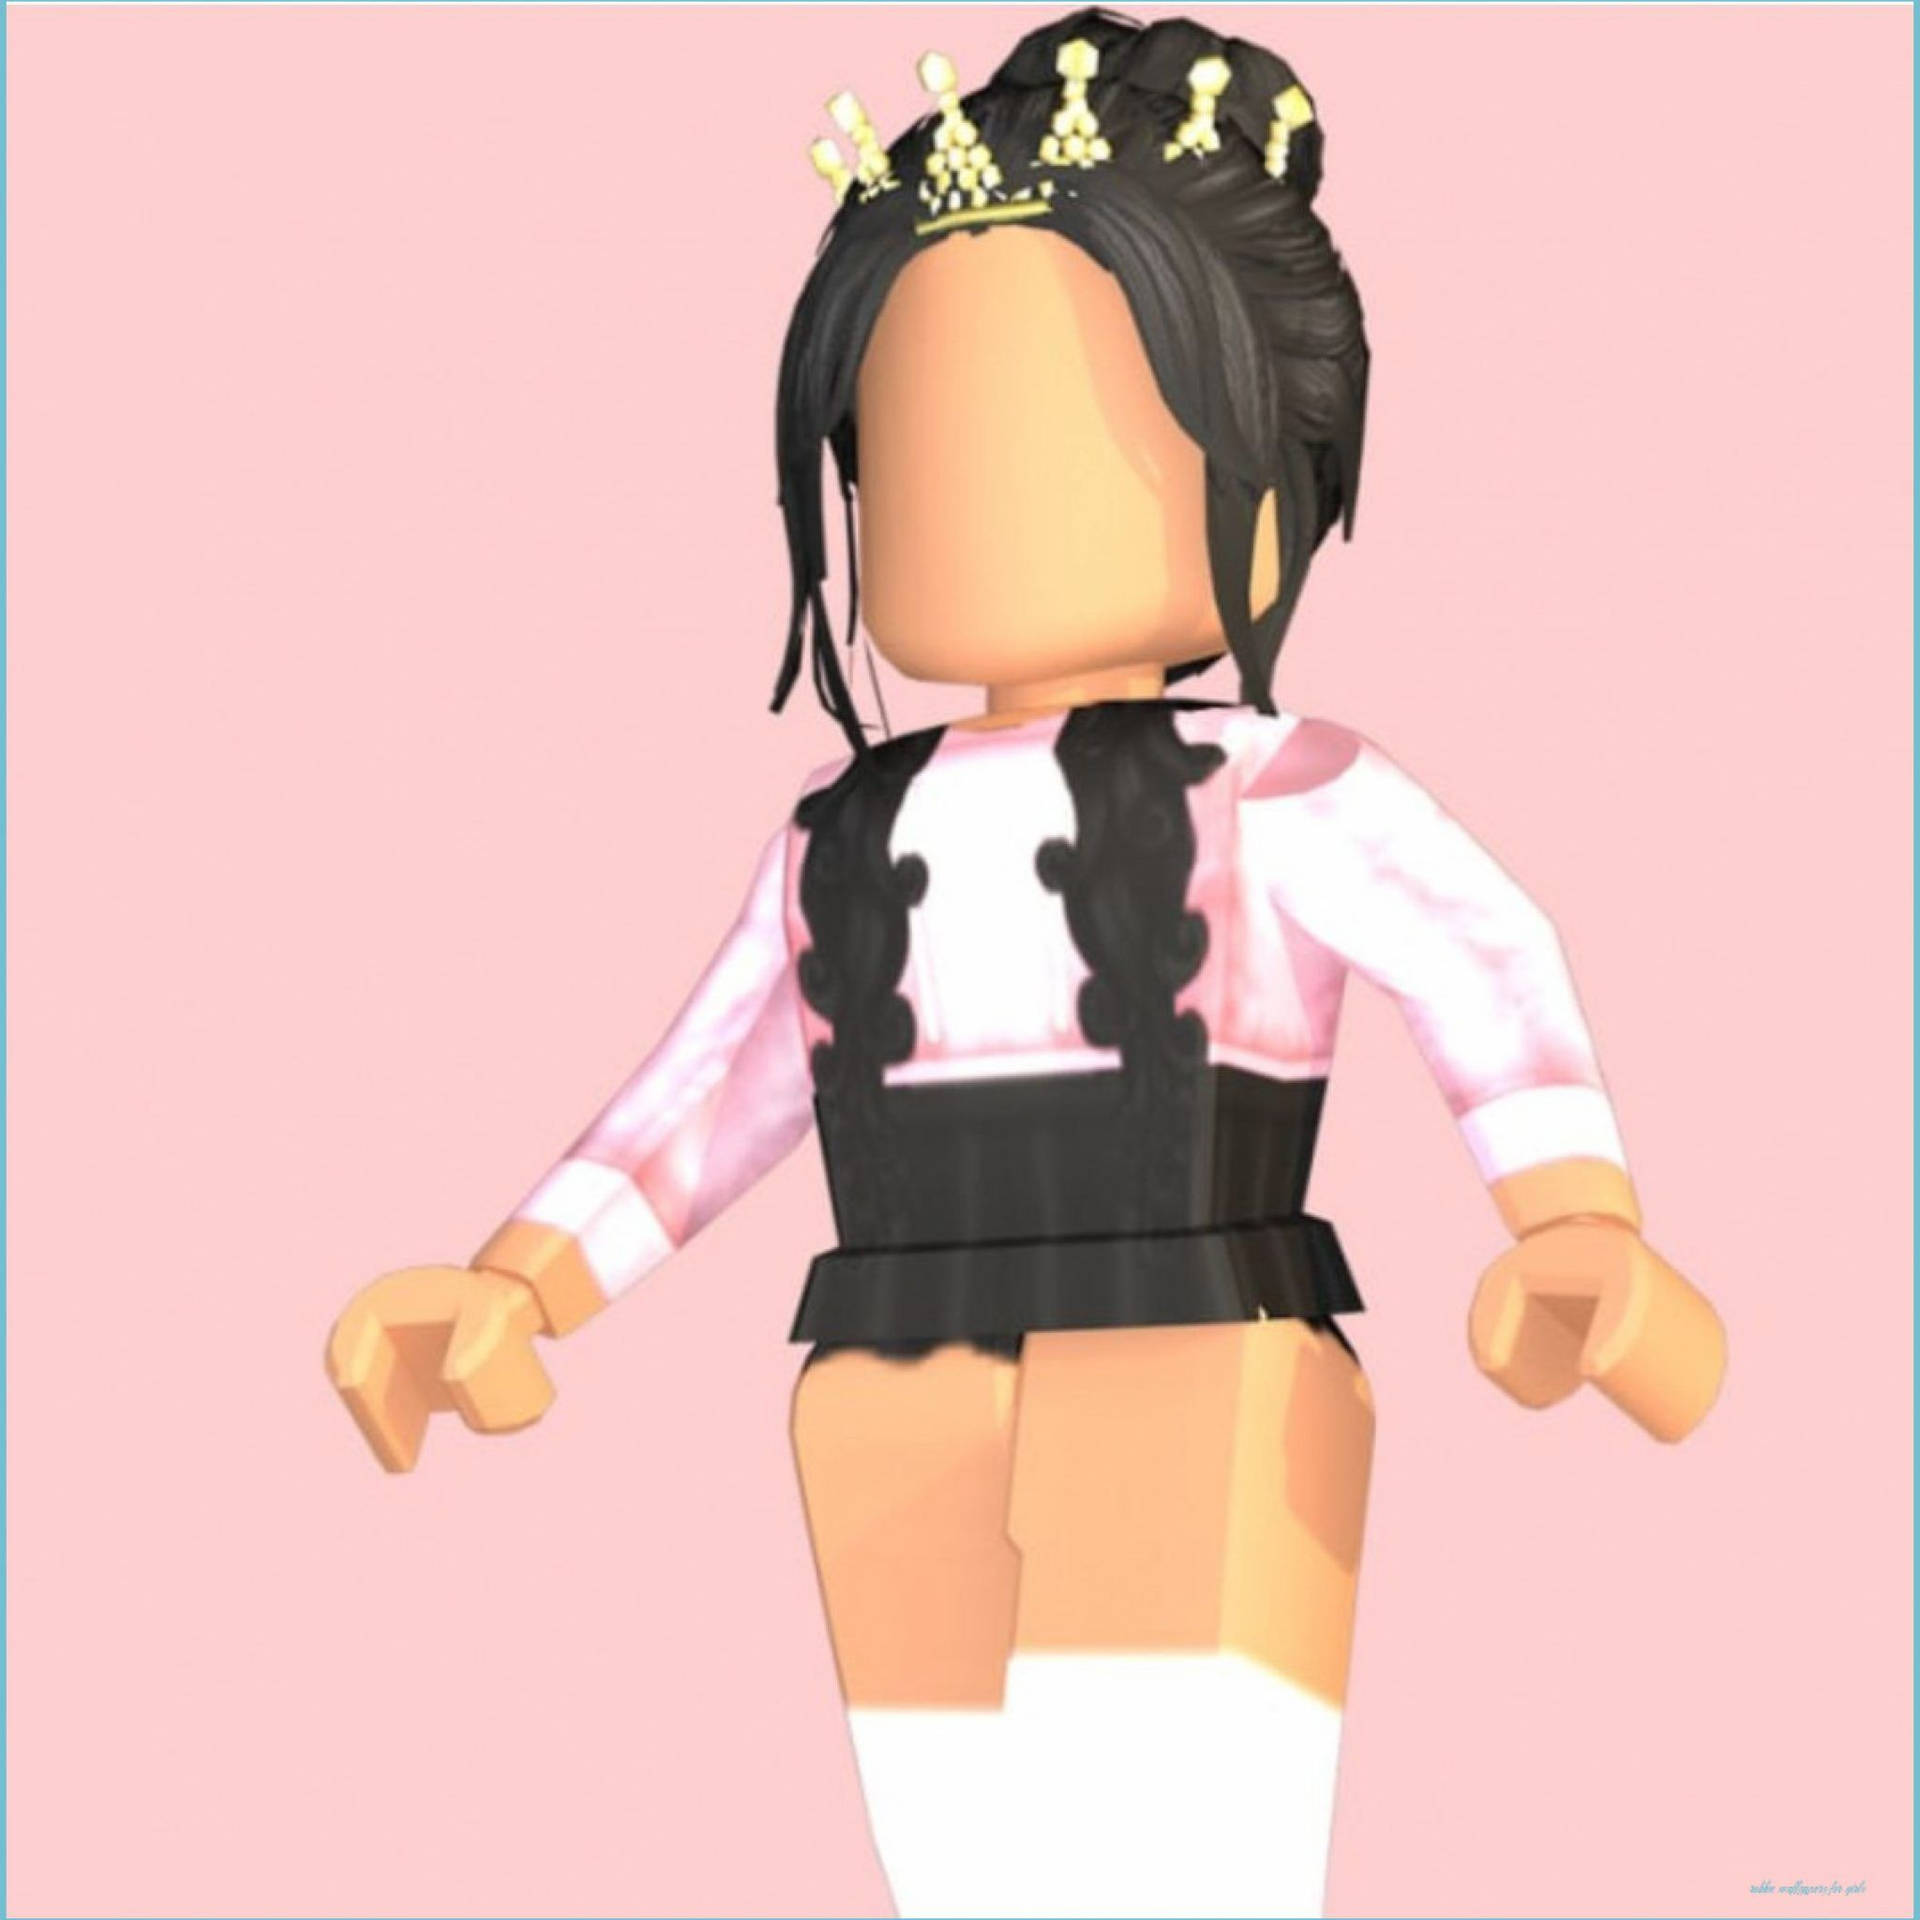 Download Cute Roblox With Black And Pink Outfit Wallpaper ...